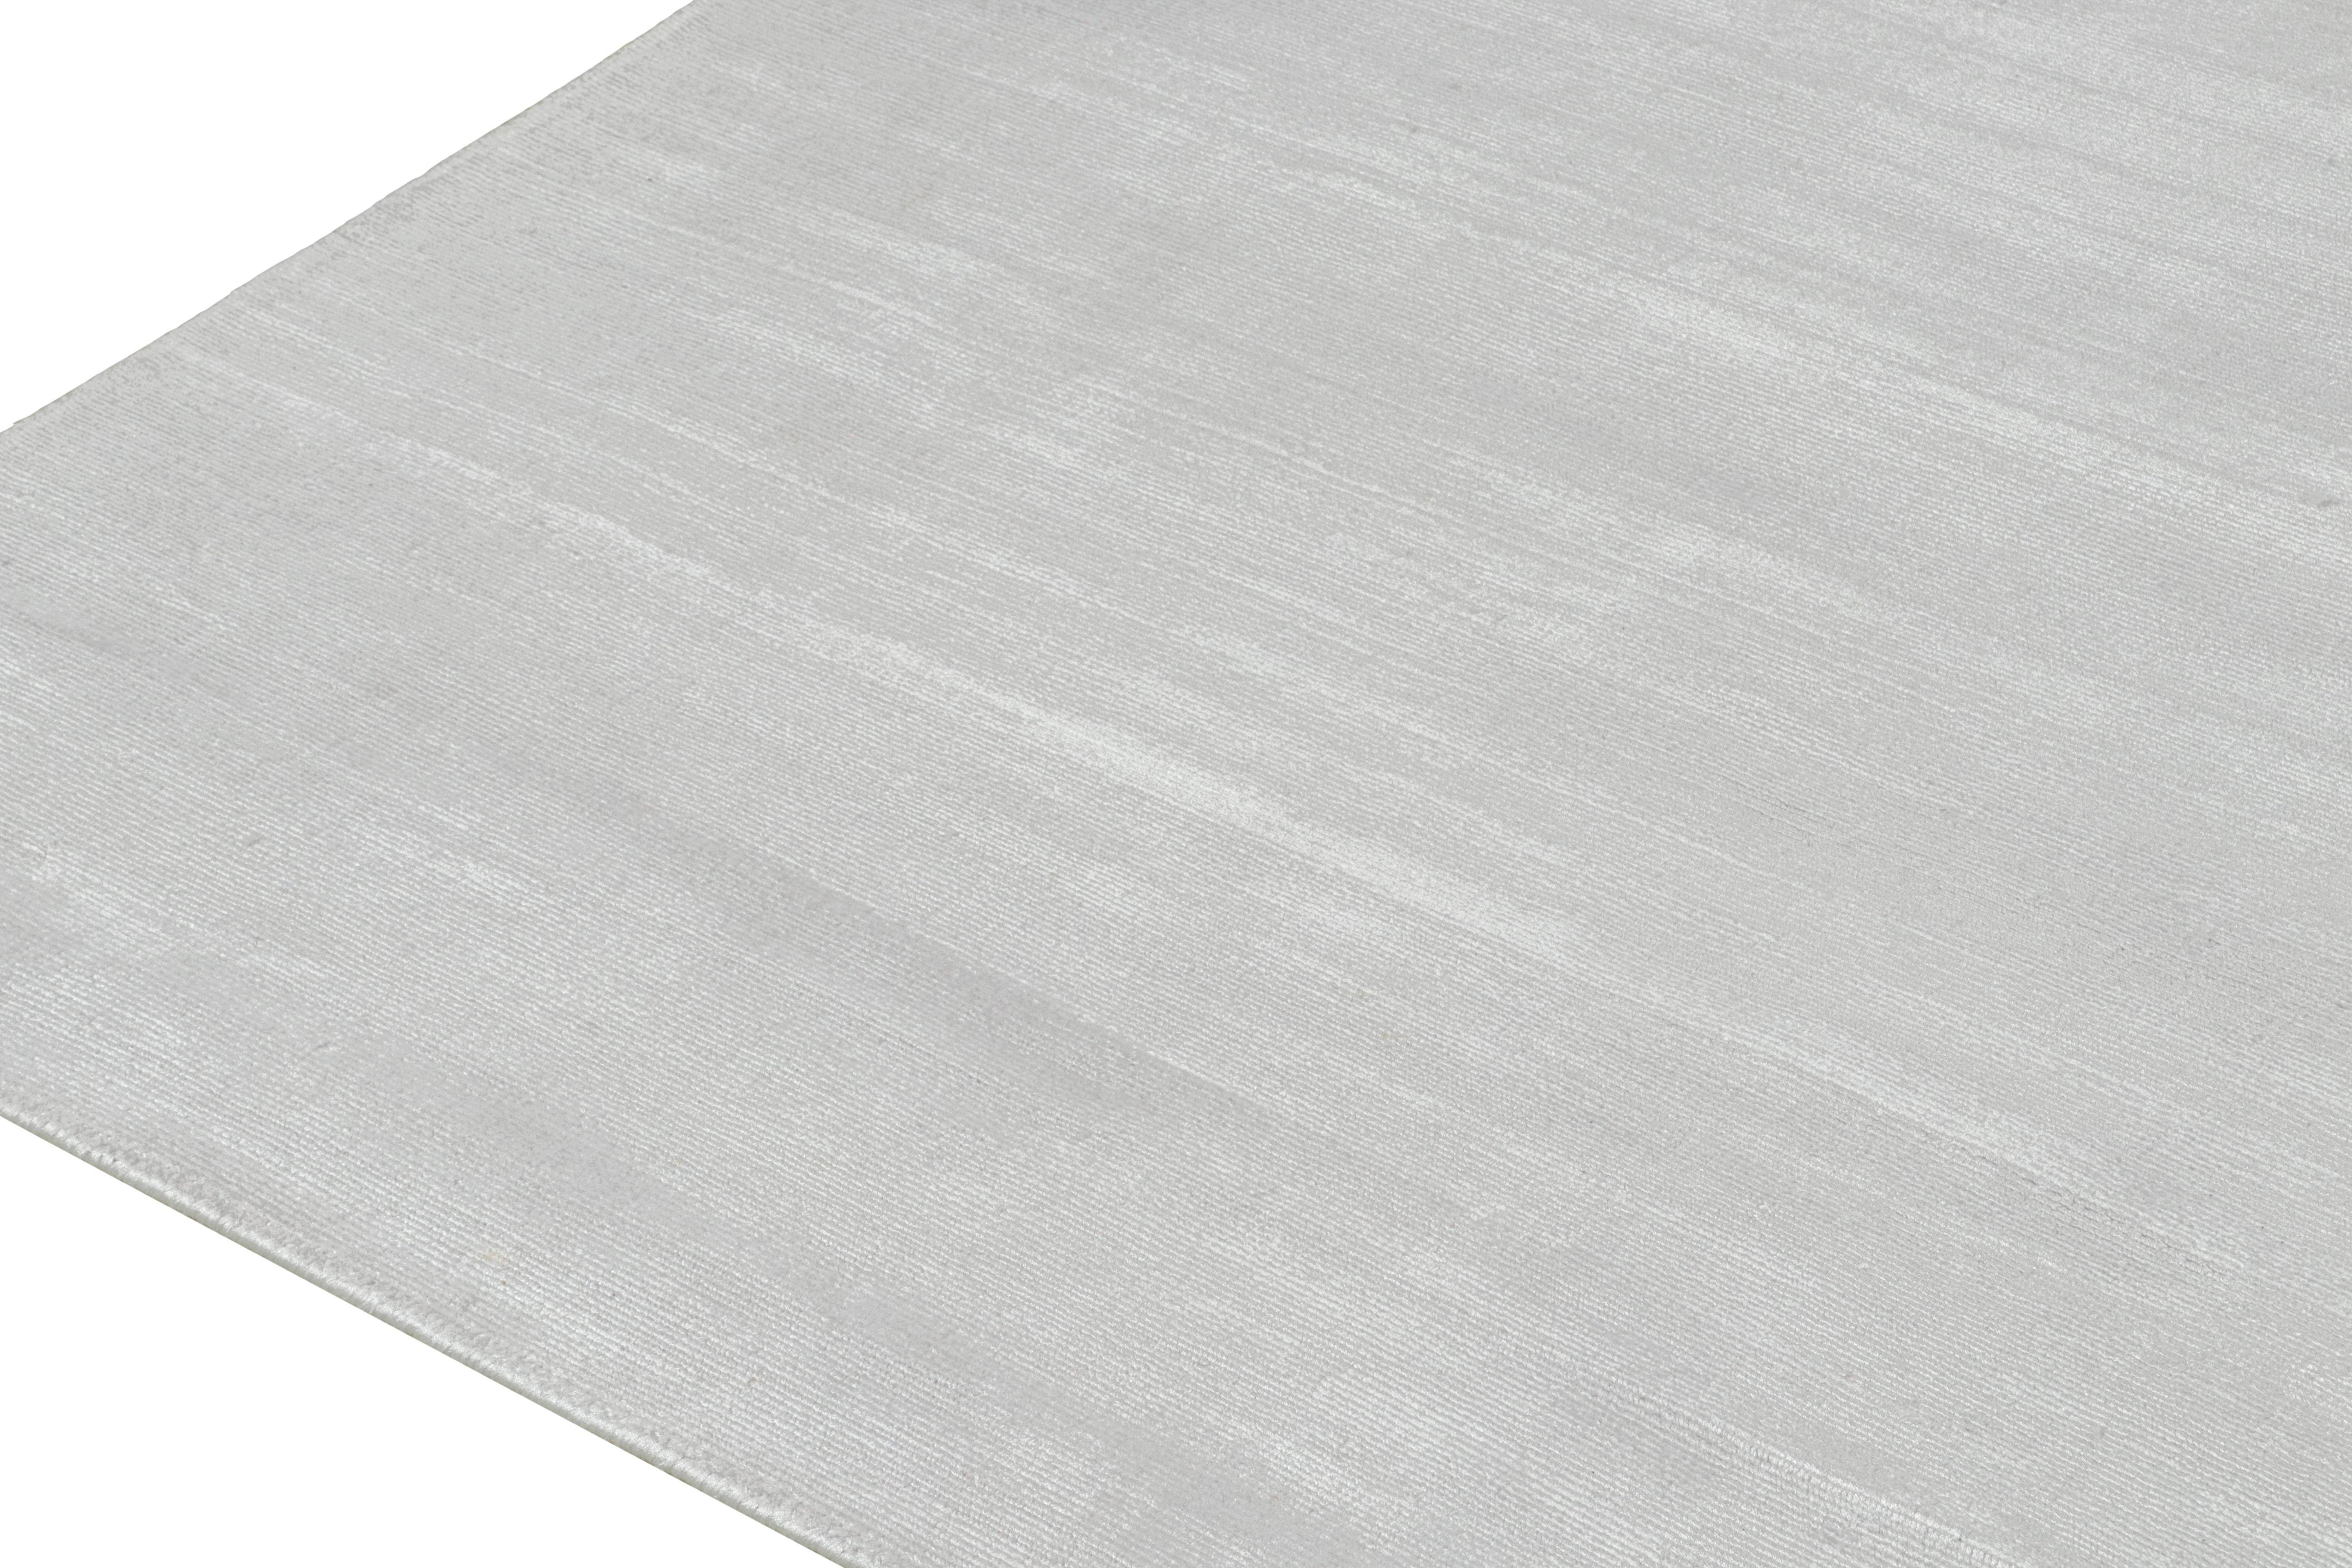 Rug & Kilim’s Modern Rug in Solid Grey and Off-White Striae